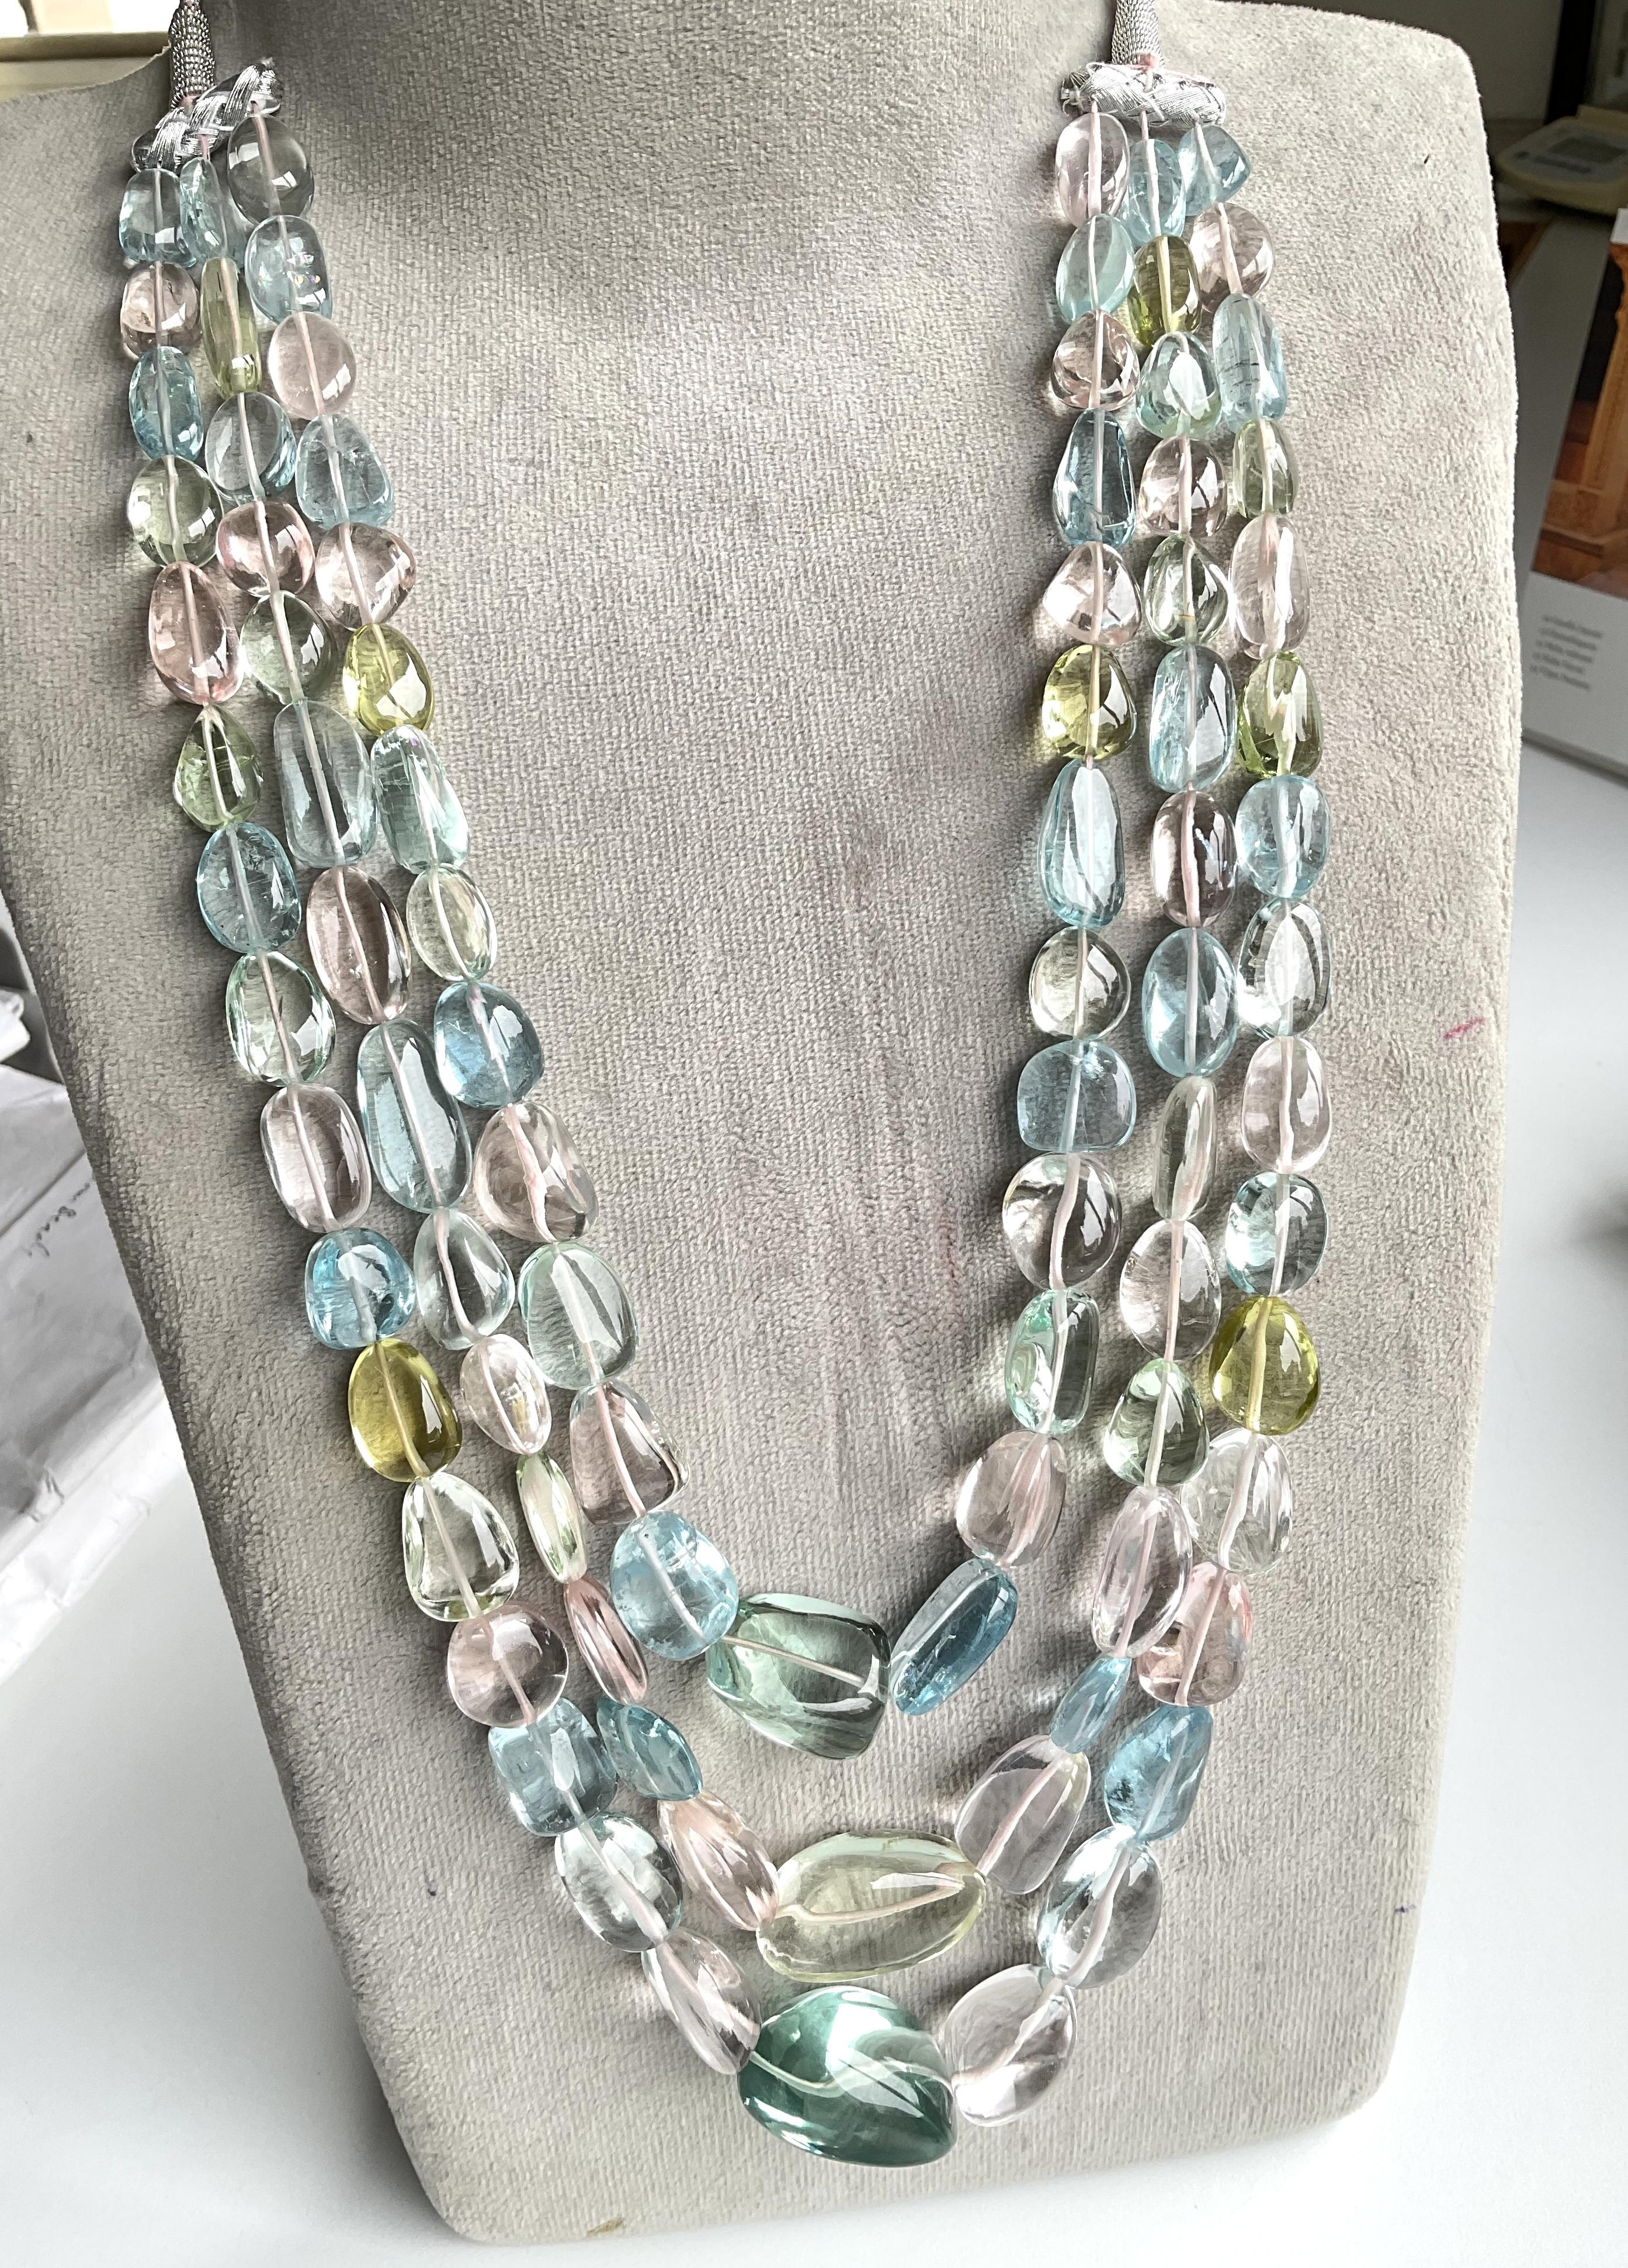 Art Deco 1362.55 Carats Multiple colors Beryl Tumbled Necklace For Fine Jewelry Gemstones For Sale